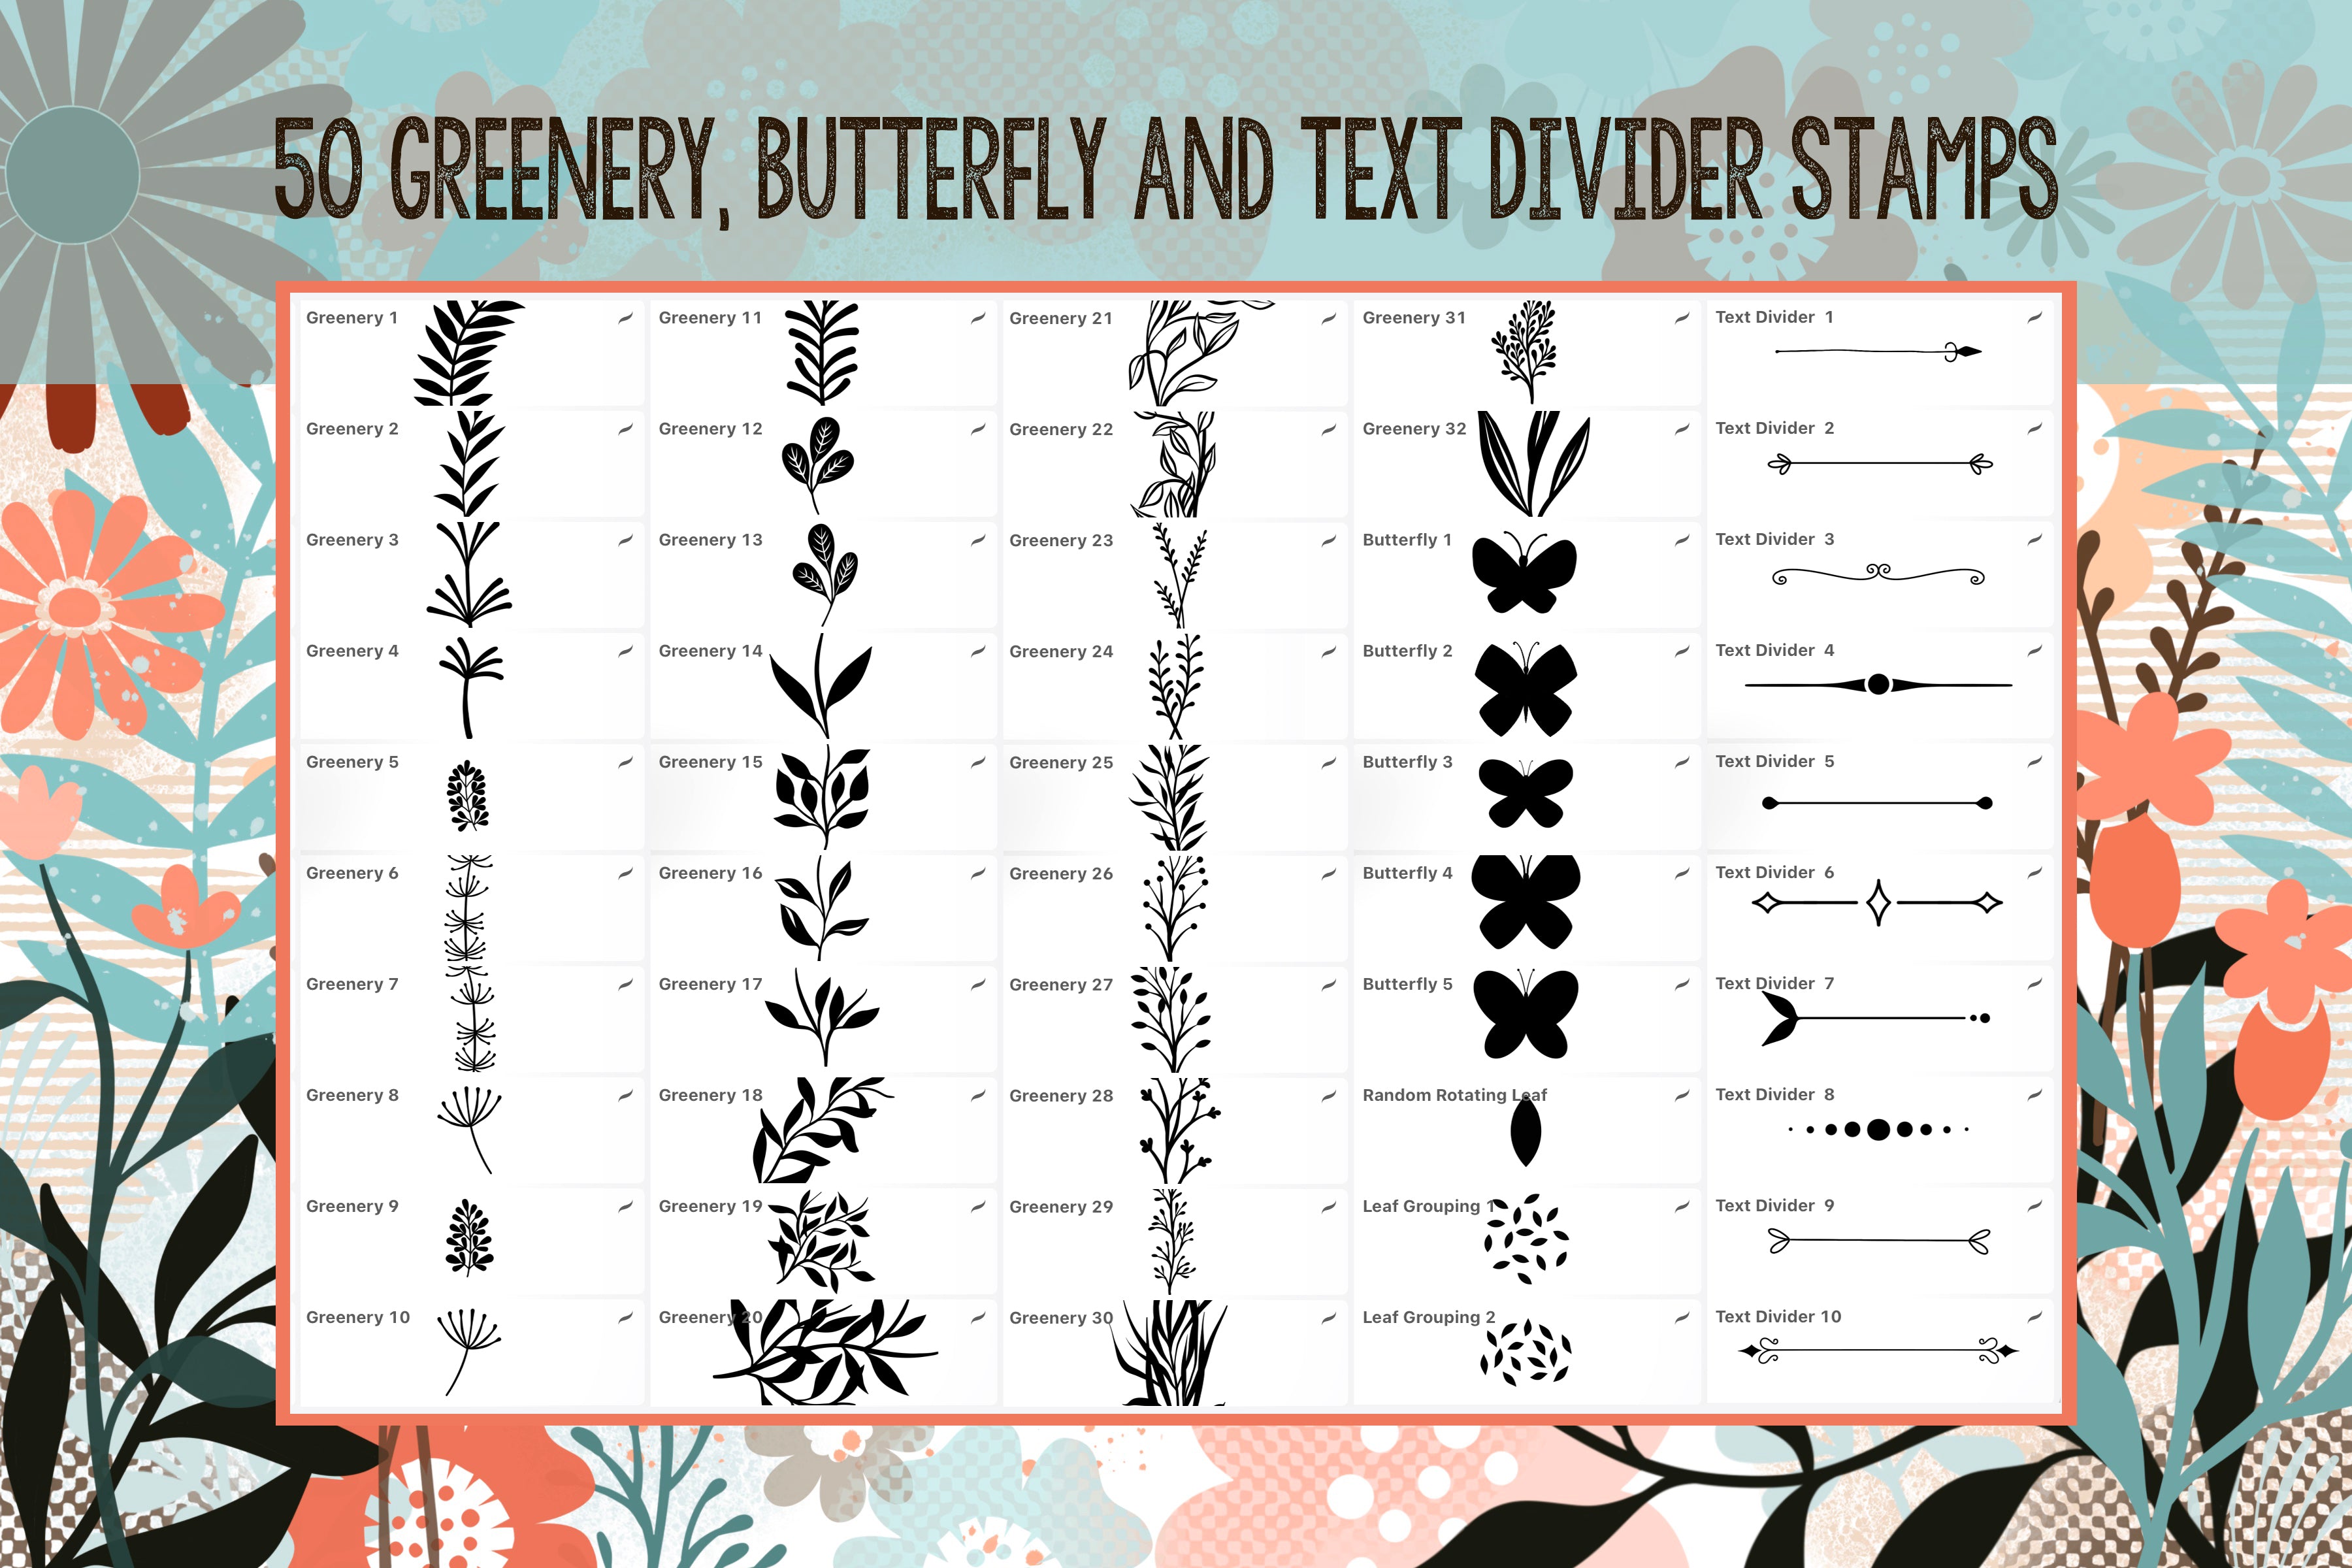 Volume 136 - May Floral Gloral Garden Stamps